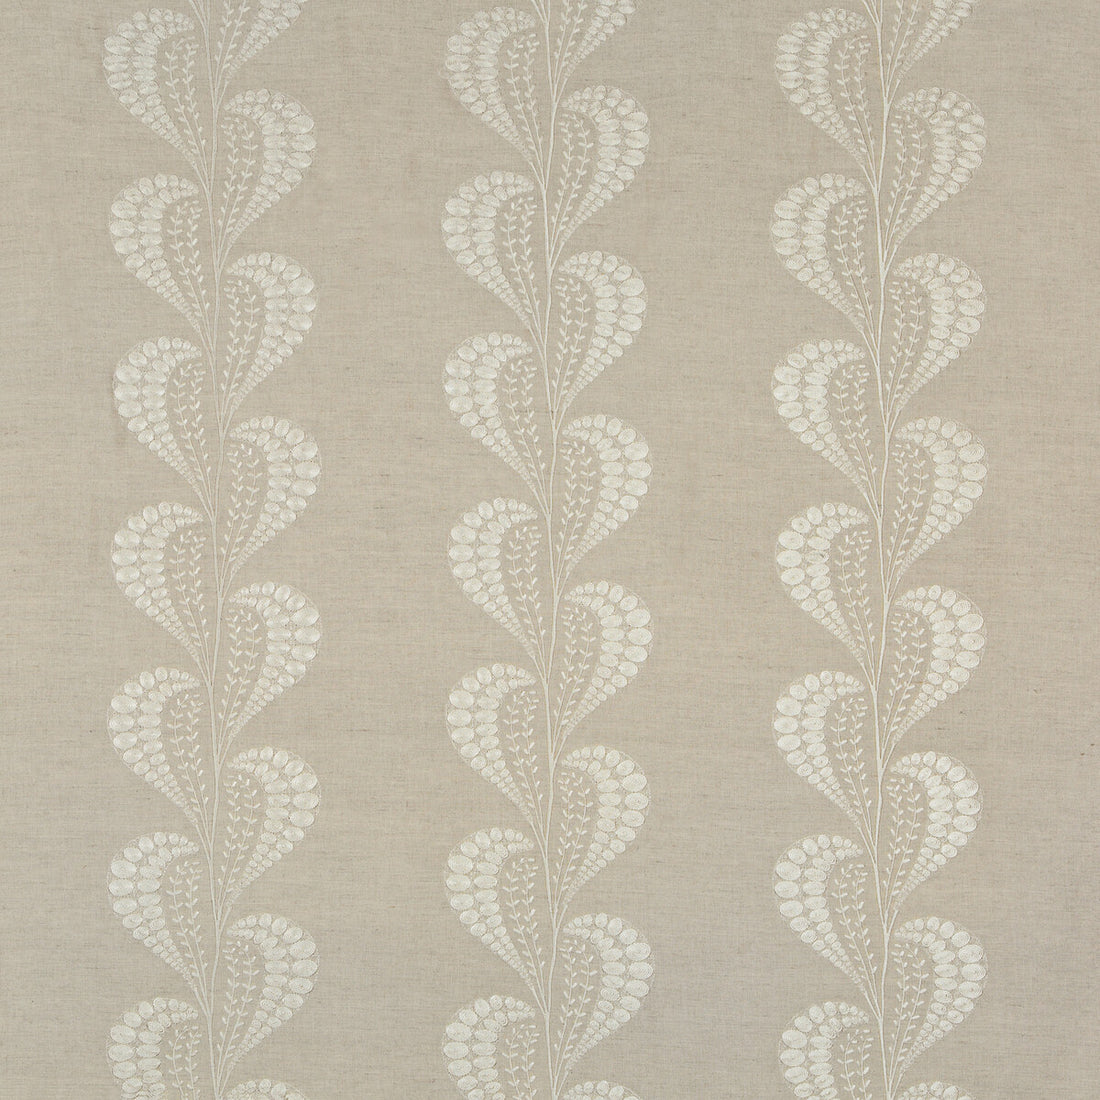 Tisza fabric in linen color - pattern 4787.16.0 - by Kravet Couture in the Windsor Smith Naila collection